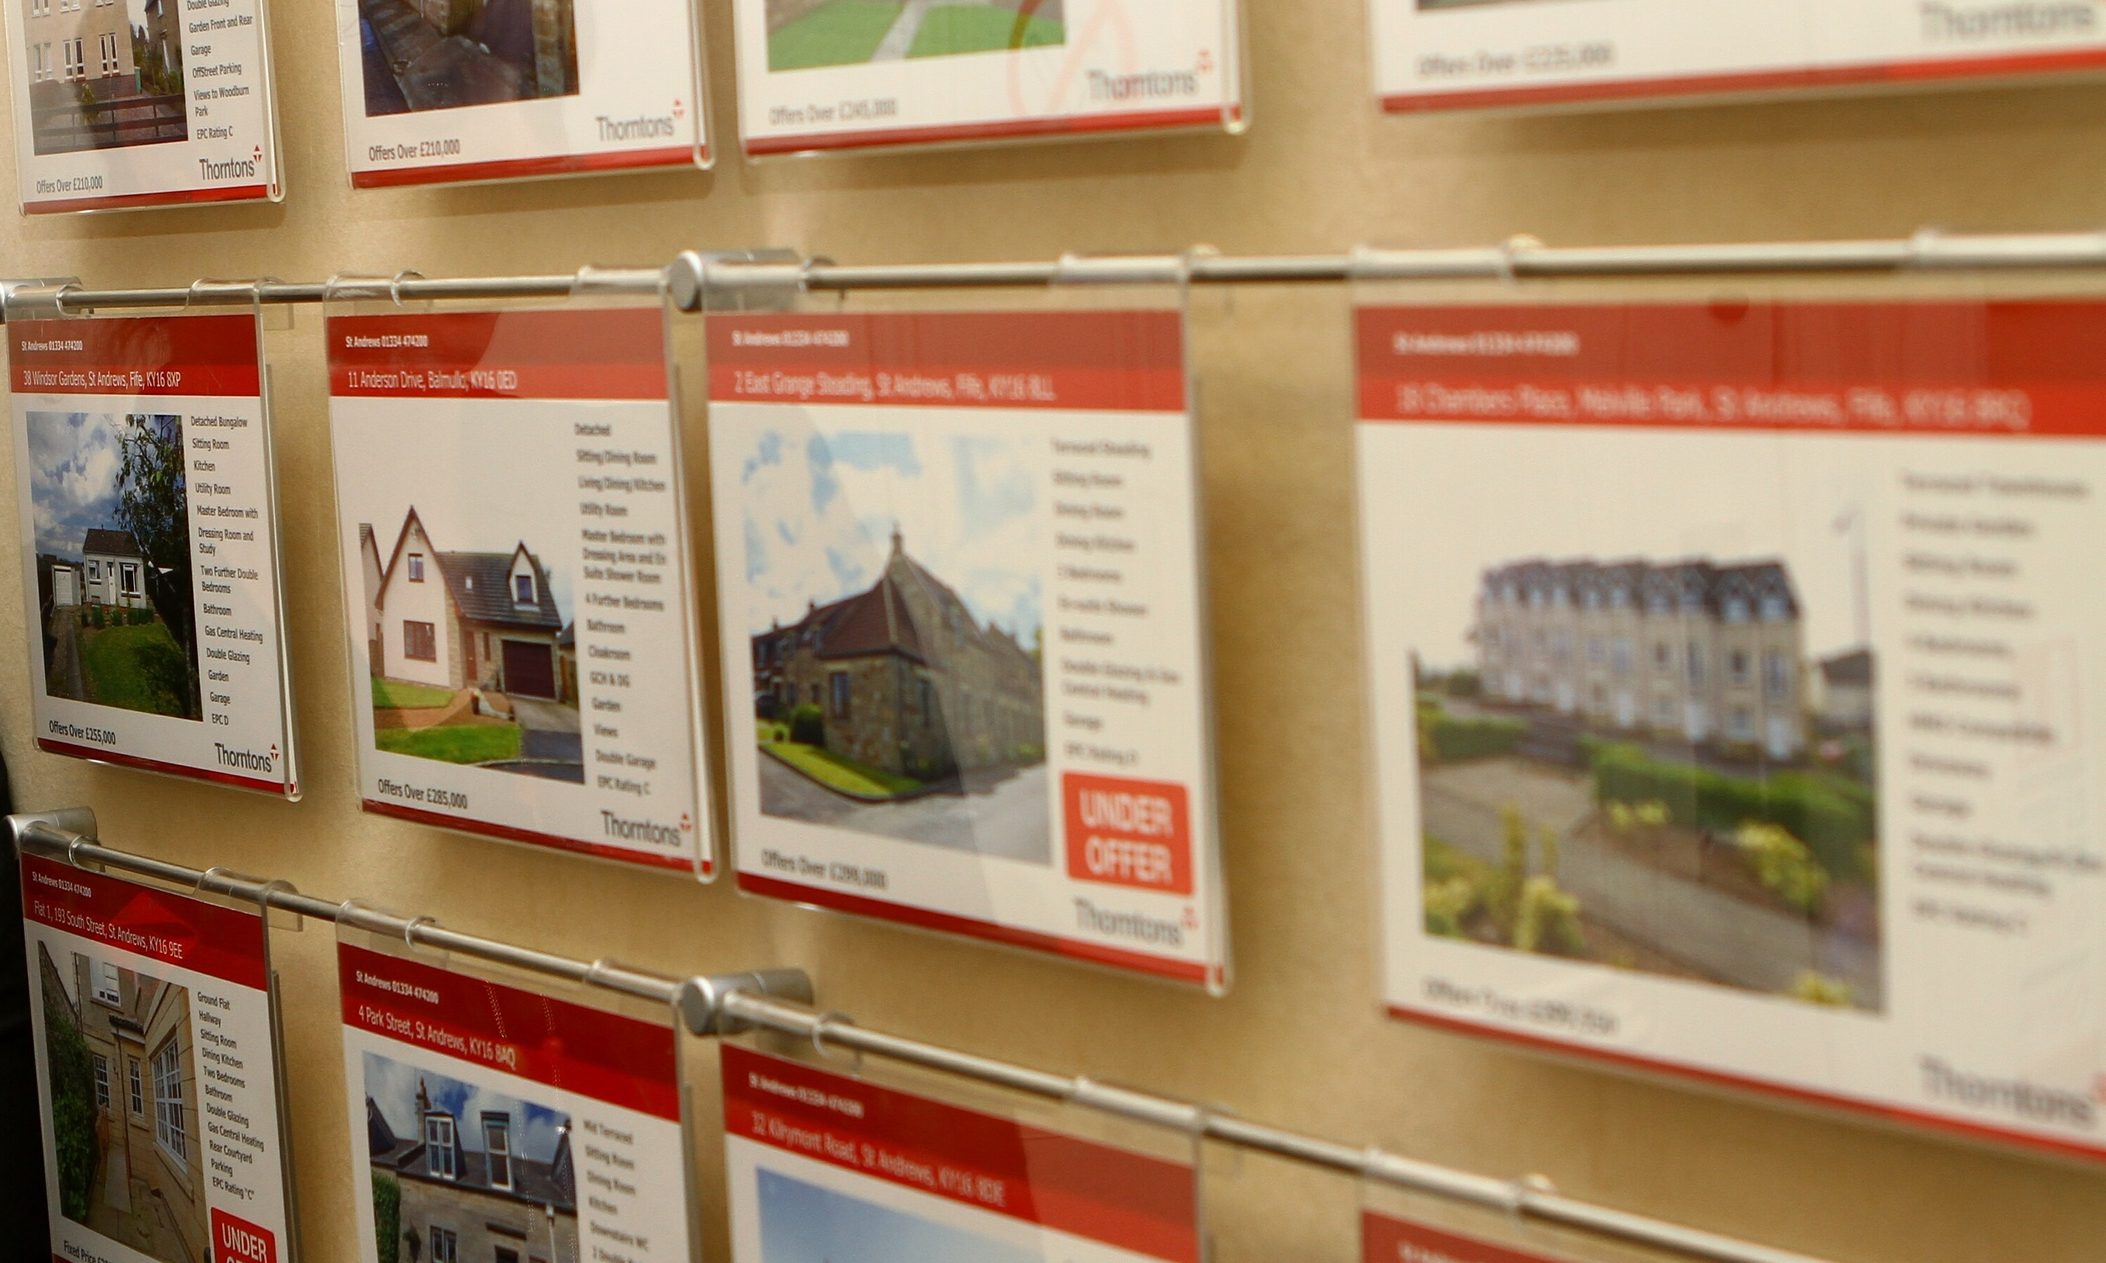 Properties have been selling for much more than valuation